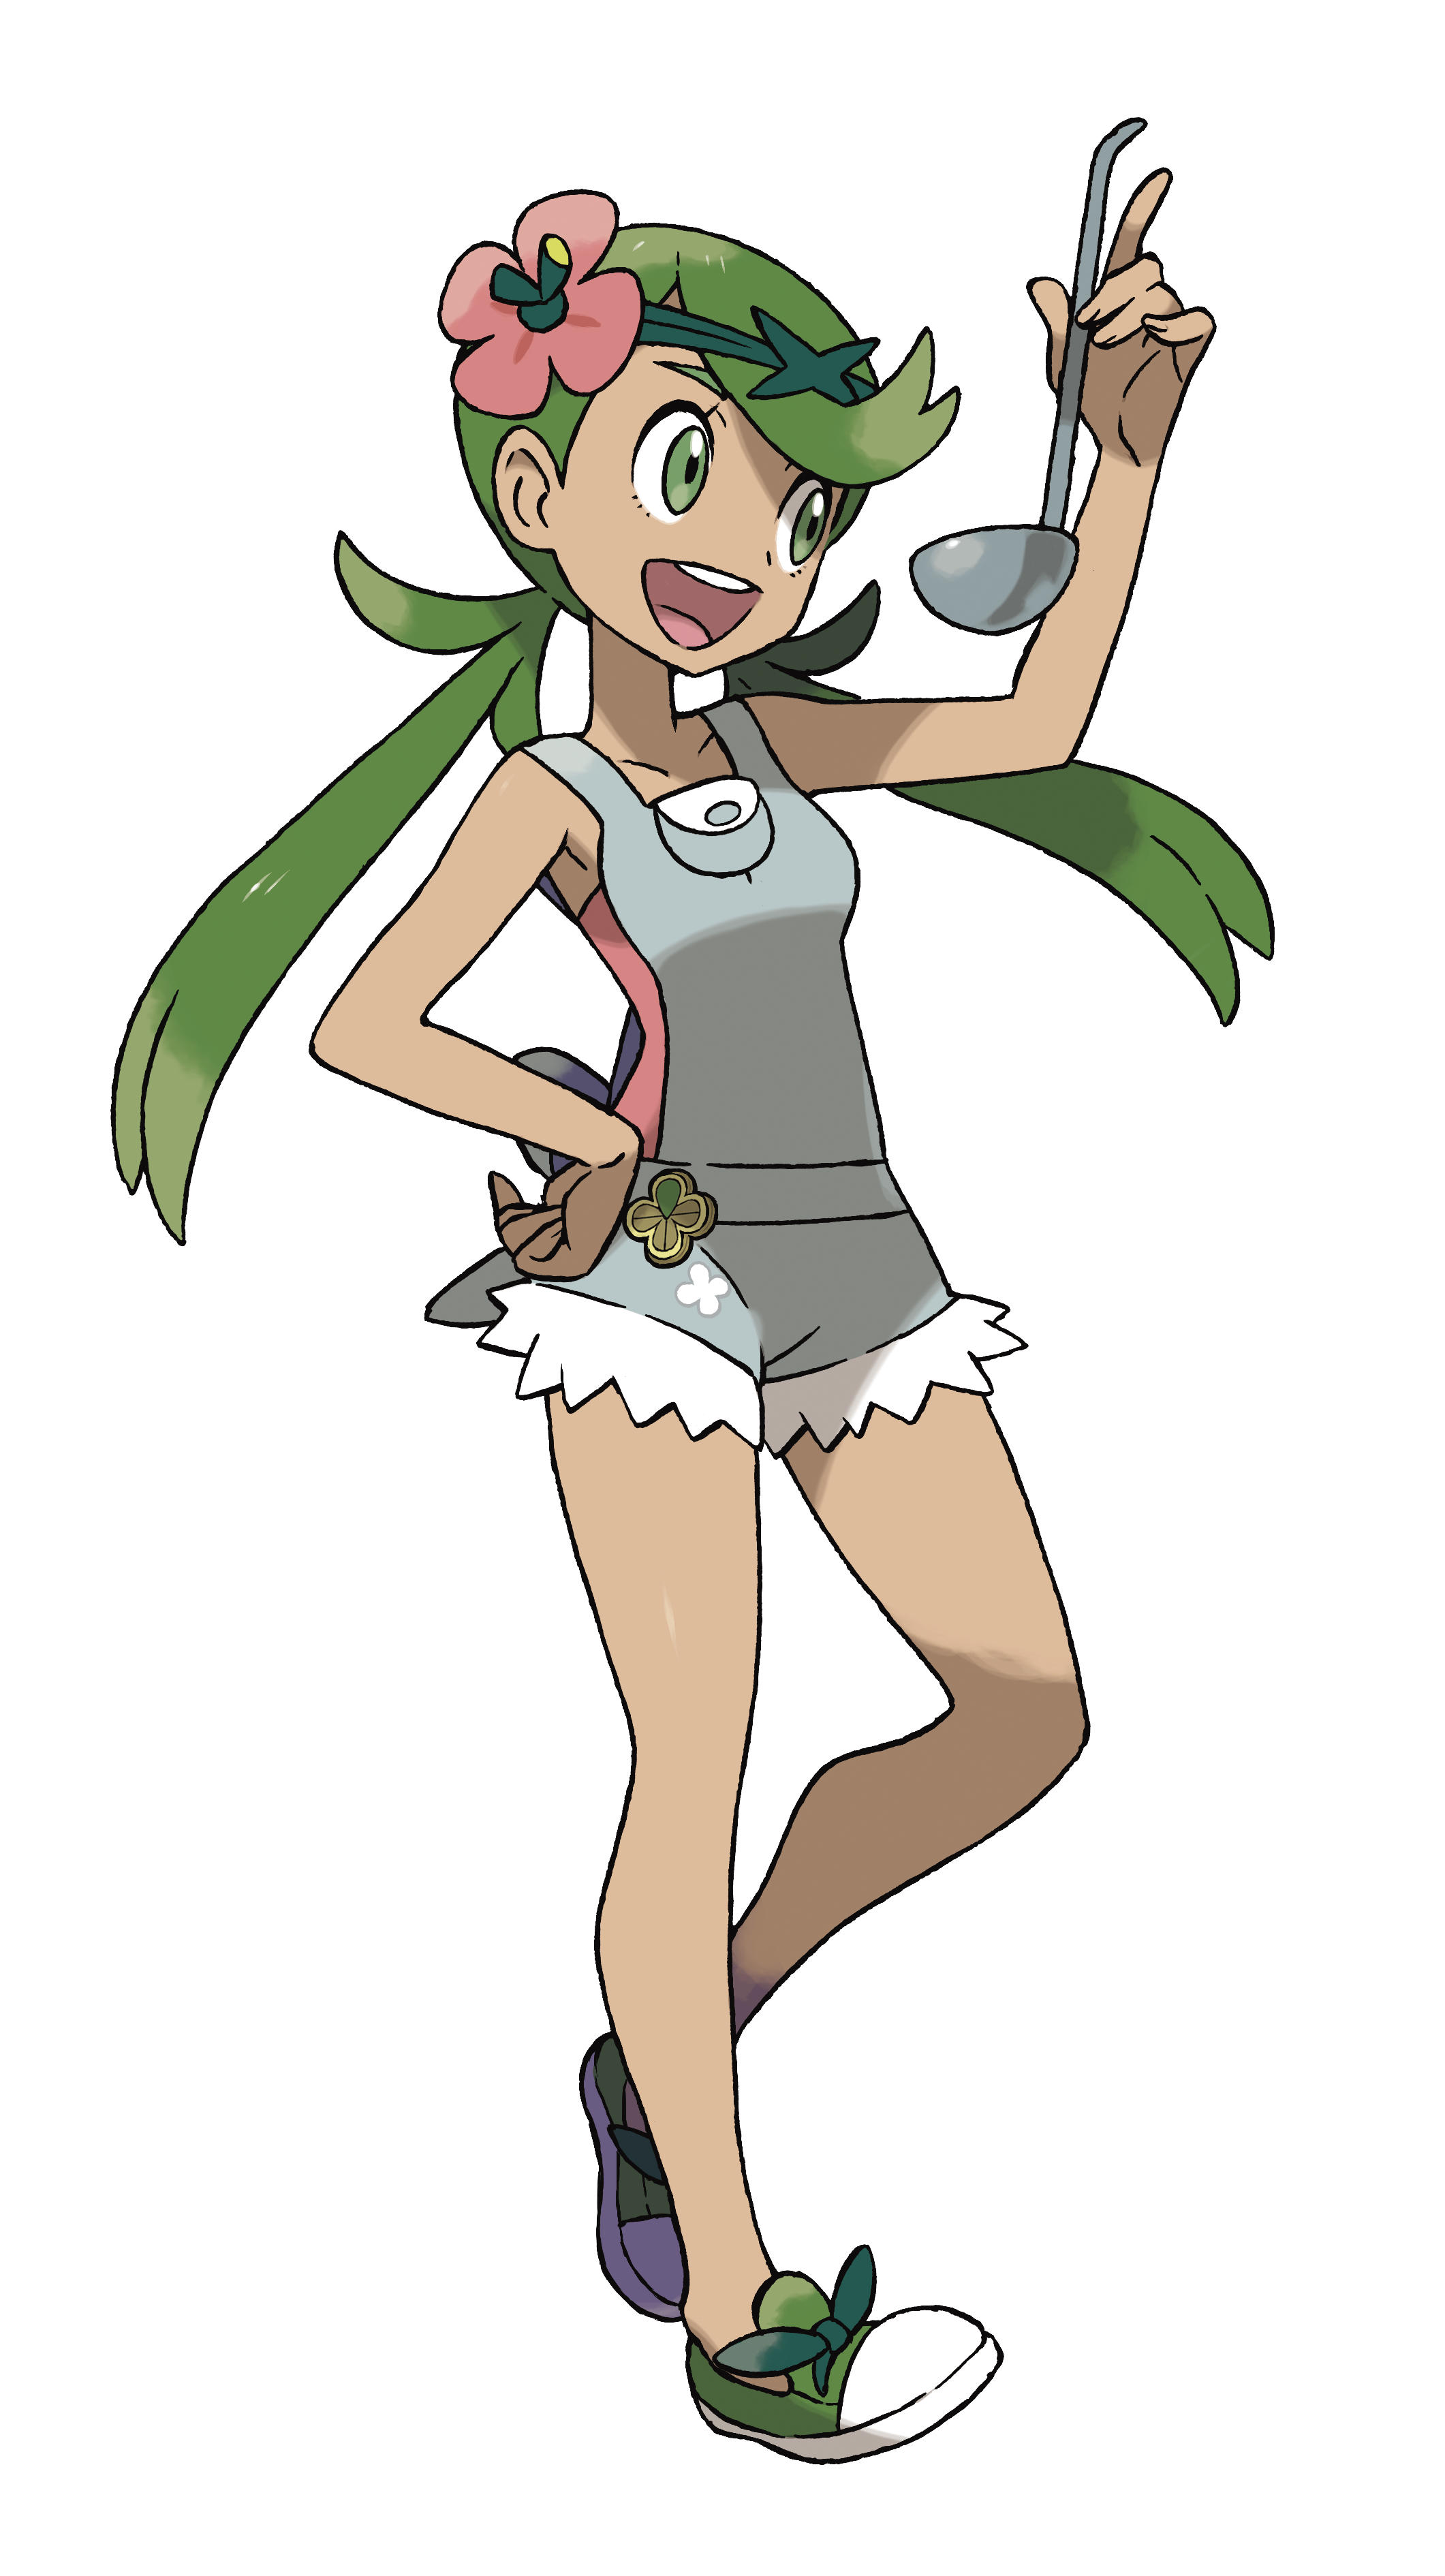 Pokémon Club - Mallow got a Z-Ring and a Grassium Z in the